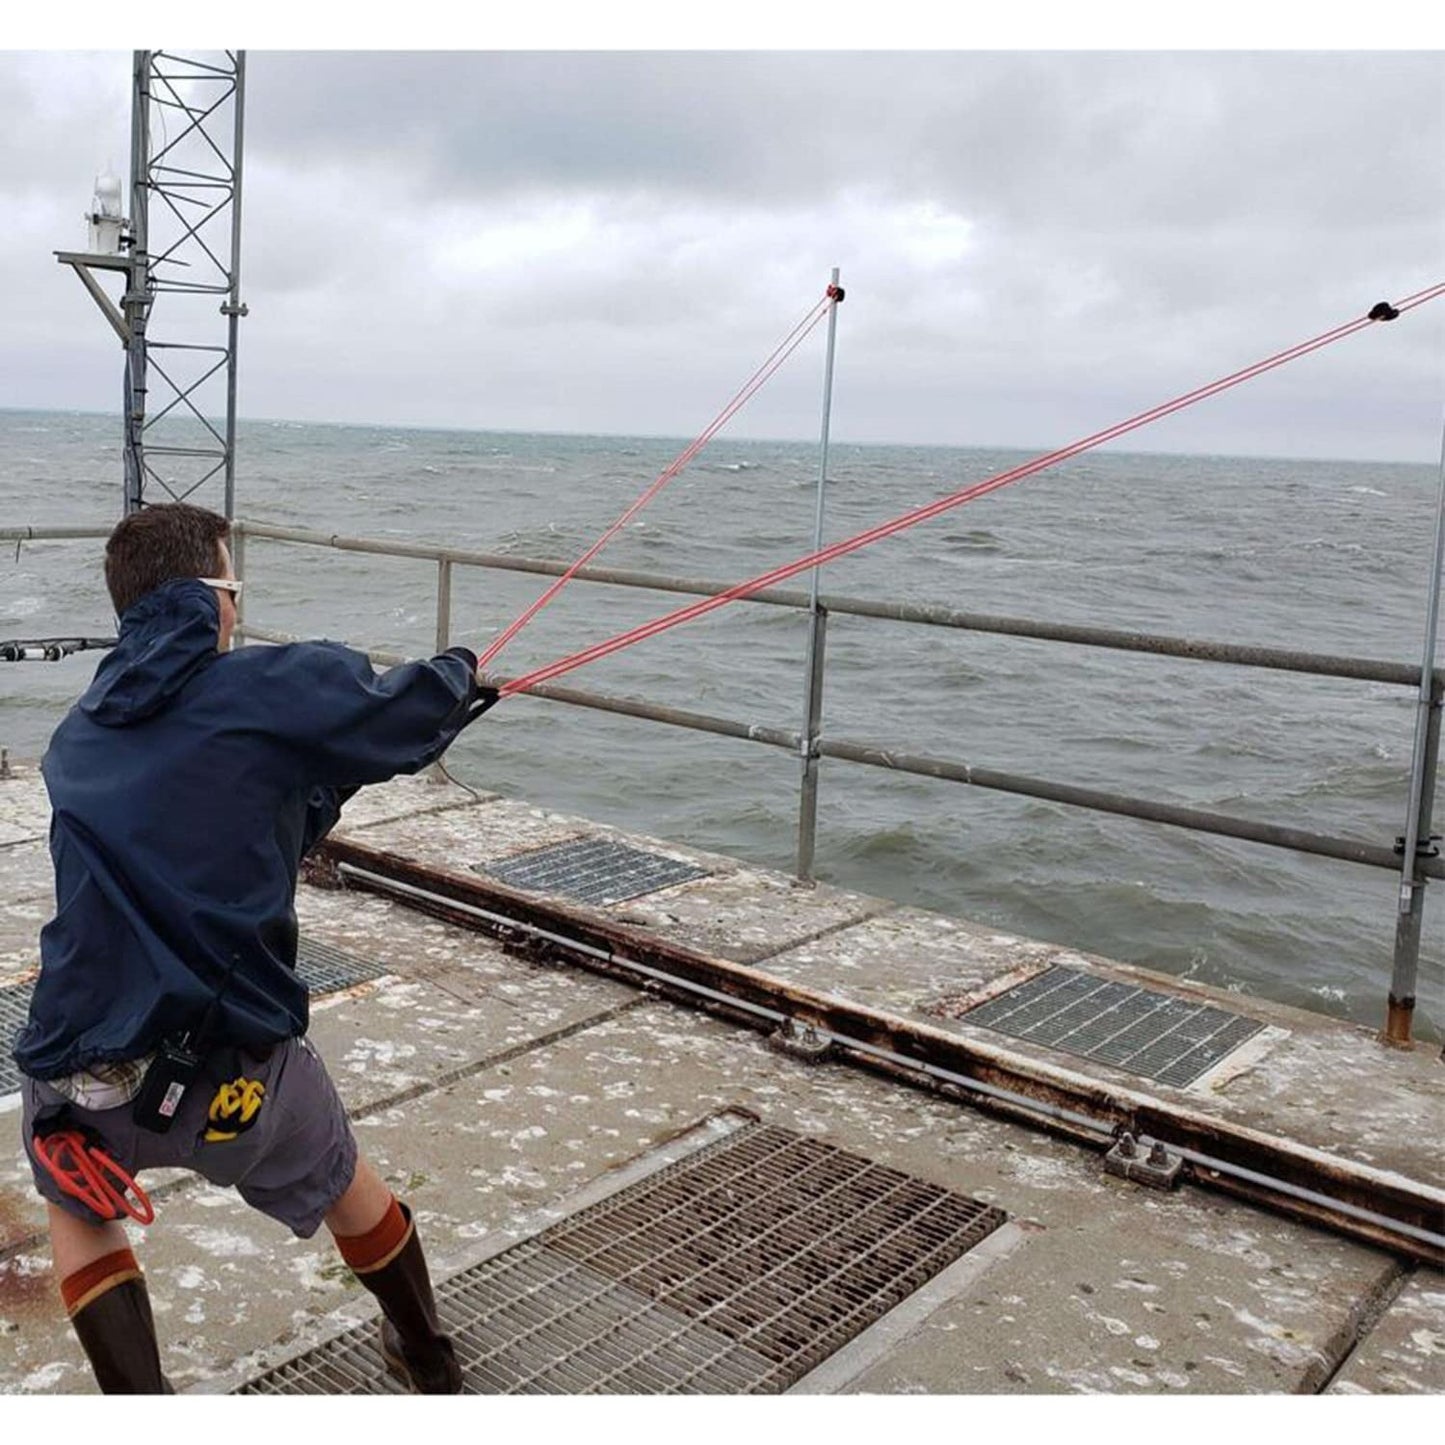 A person is on a ship about to use a water balloon launcher to launch an item into the ocean.